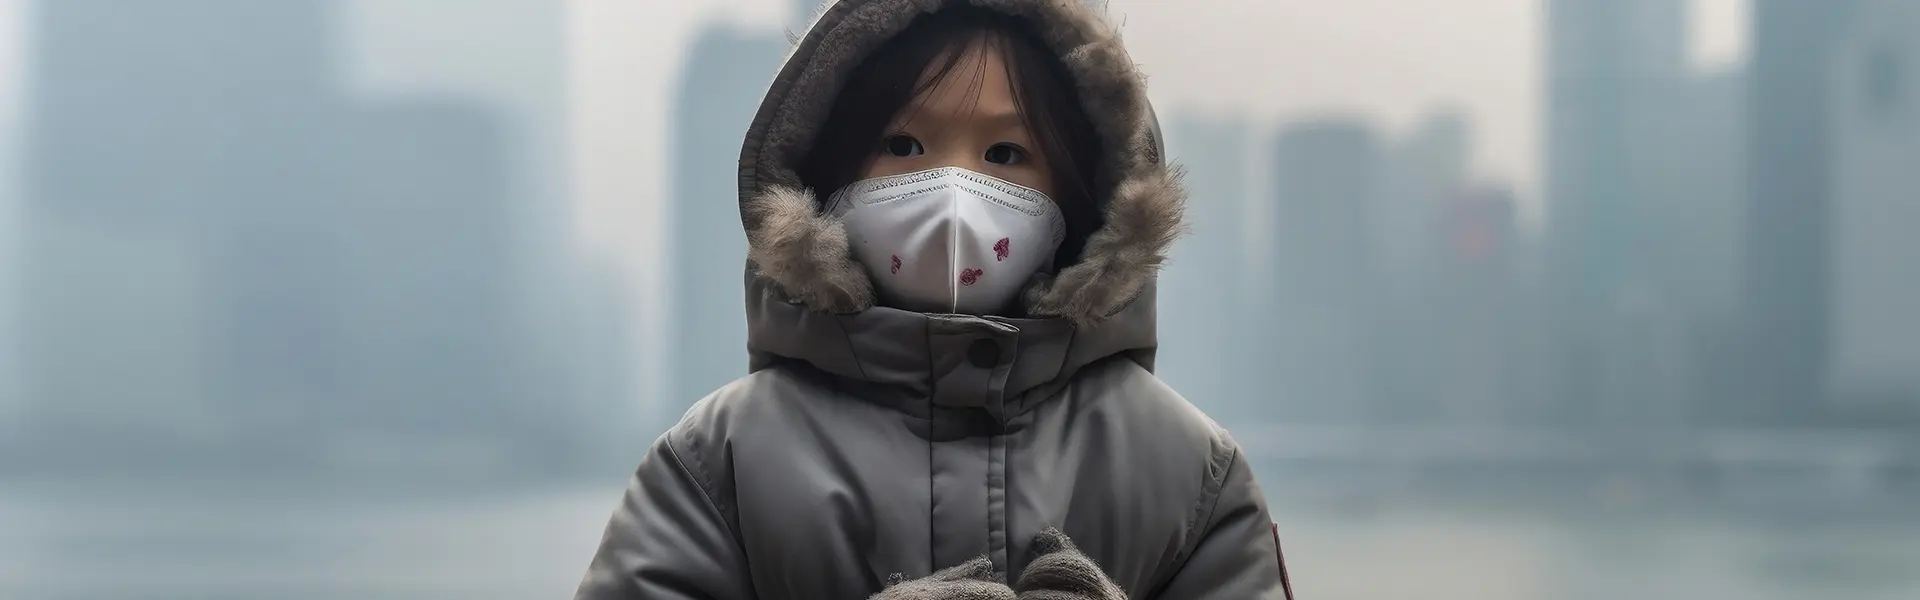 A girl wears a mask to protect herself from smog